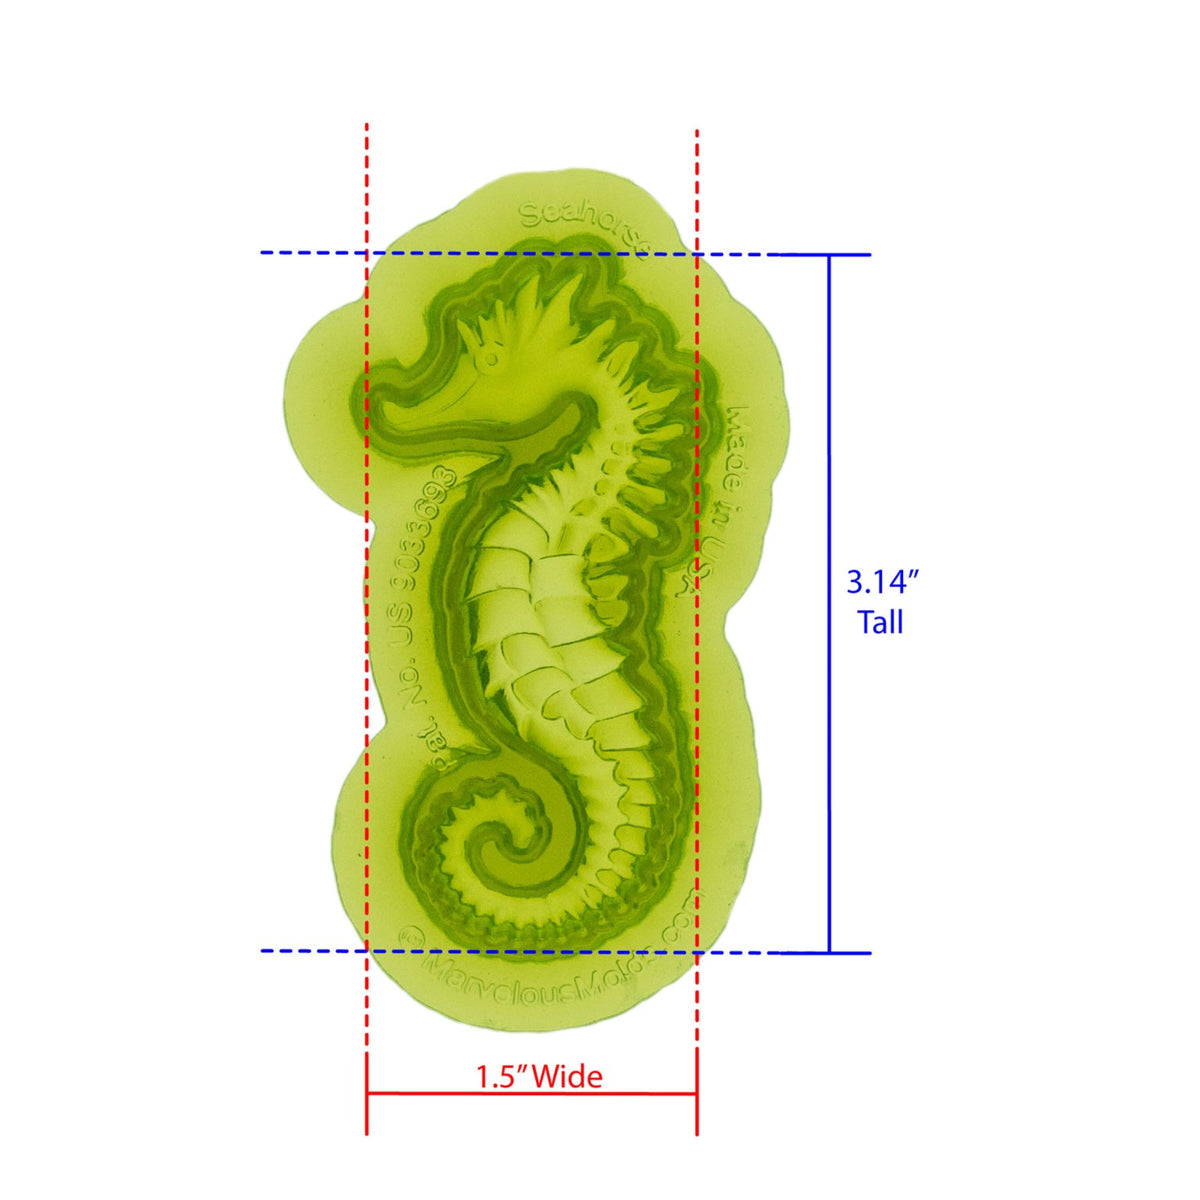 Seahorse Silicone Mold Cavity Measures 1.5 inches WIde by 3.14 inches Tall, proudly Made in USA